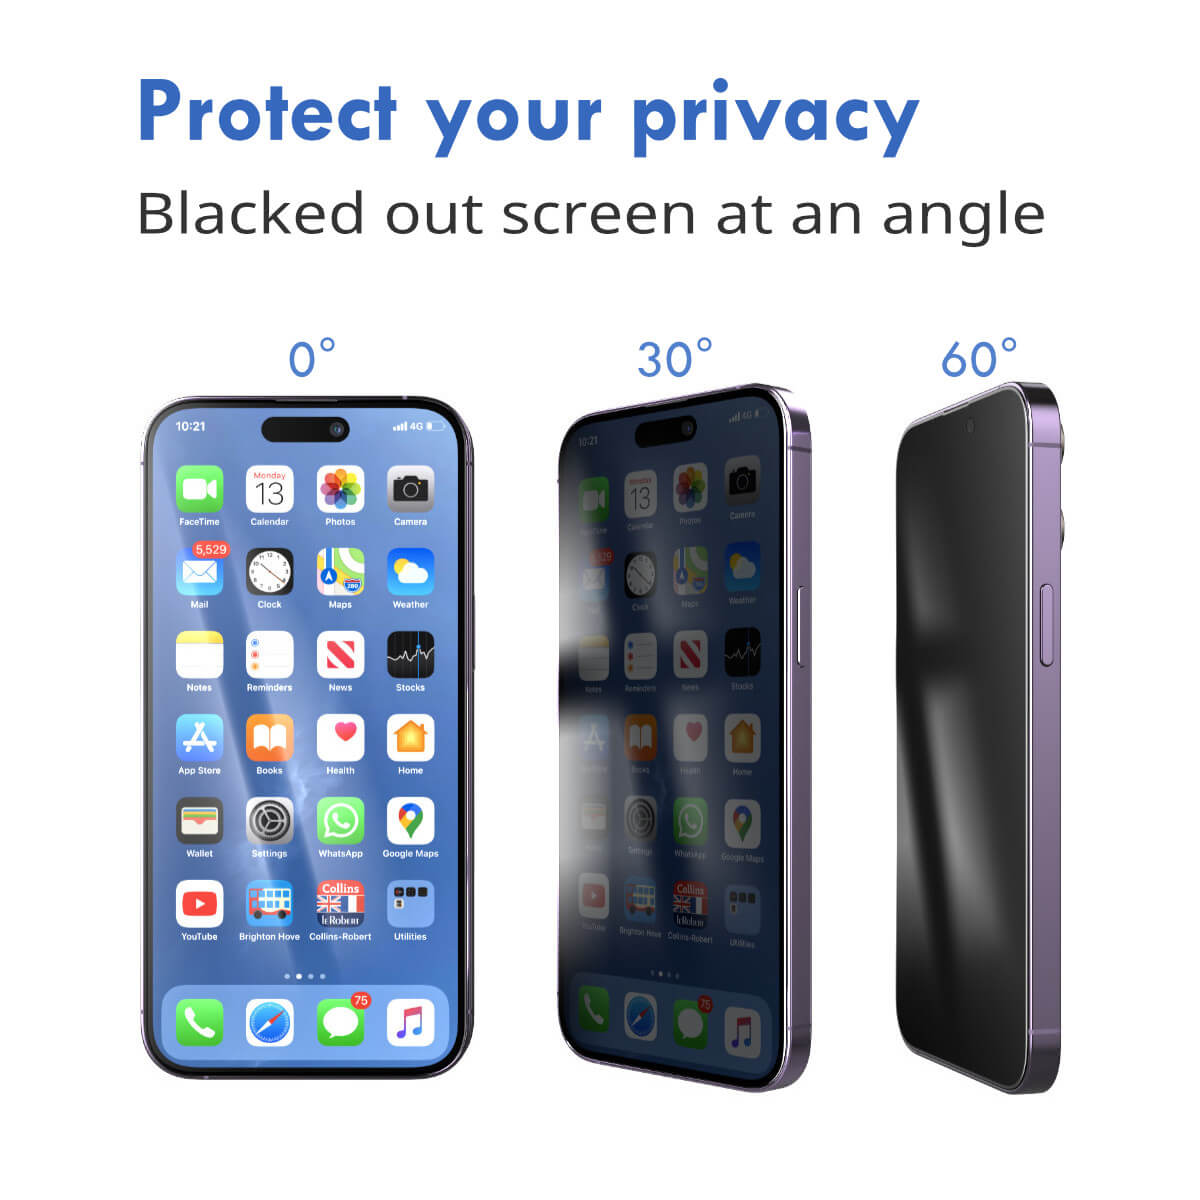 2x Hugmie iPhone 11 Pro Max/XS Max Privacy Screen Protector